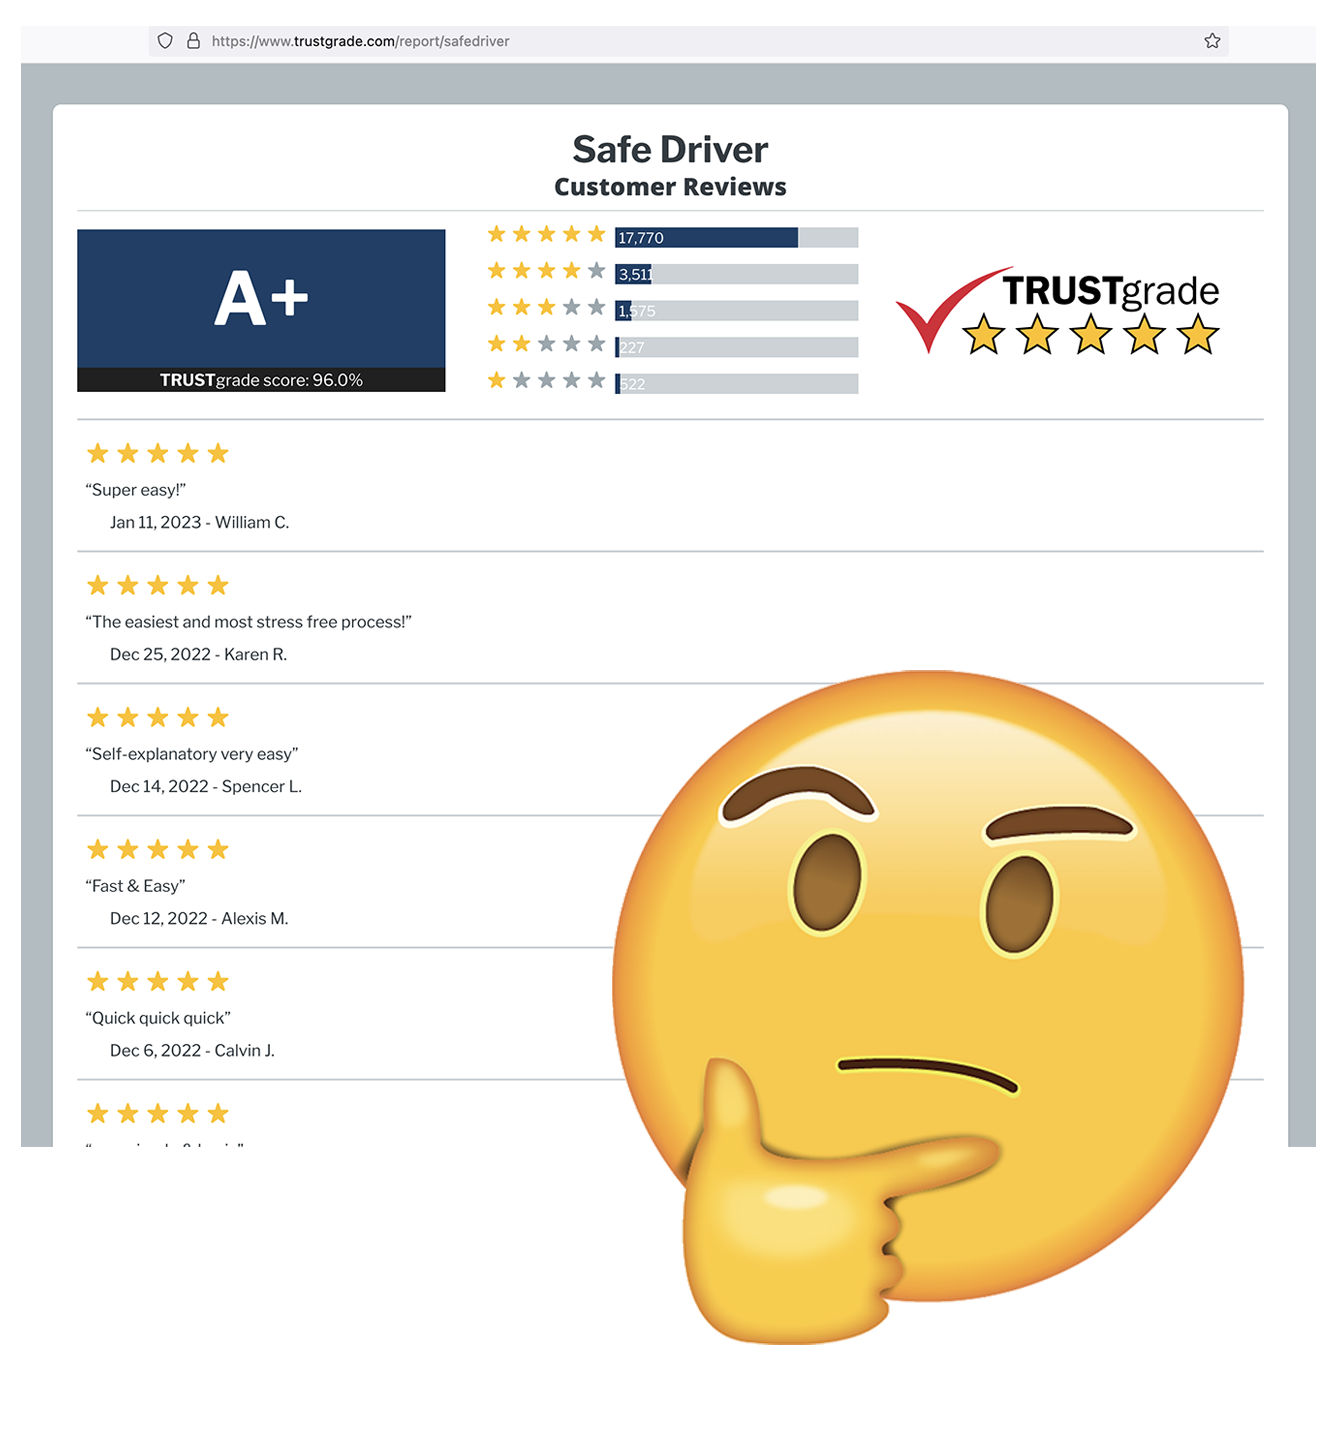 TrustGrade.com appears to be a fake website used by SafeDriver.com.